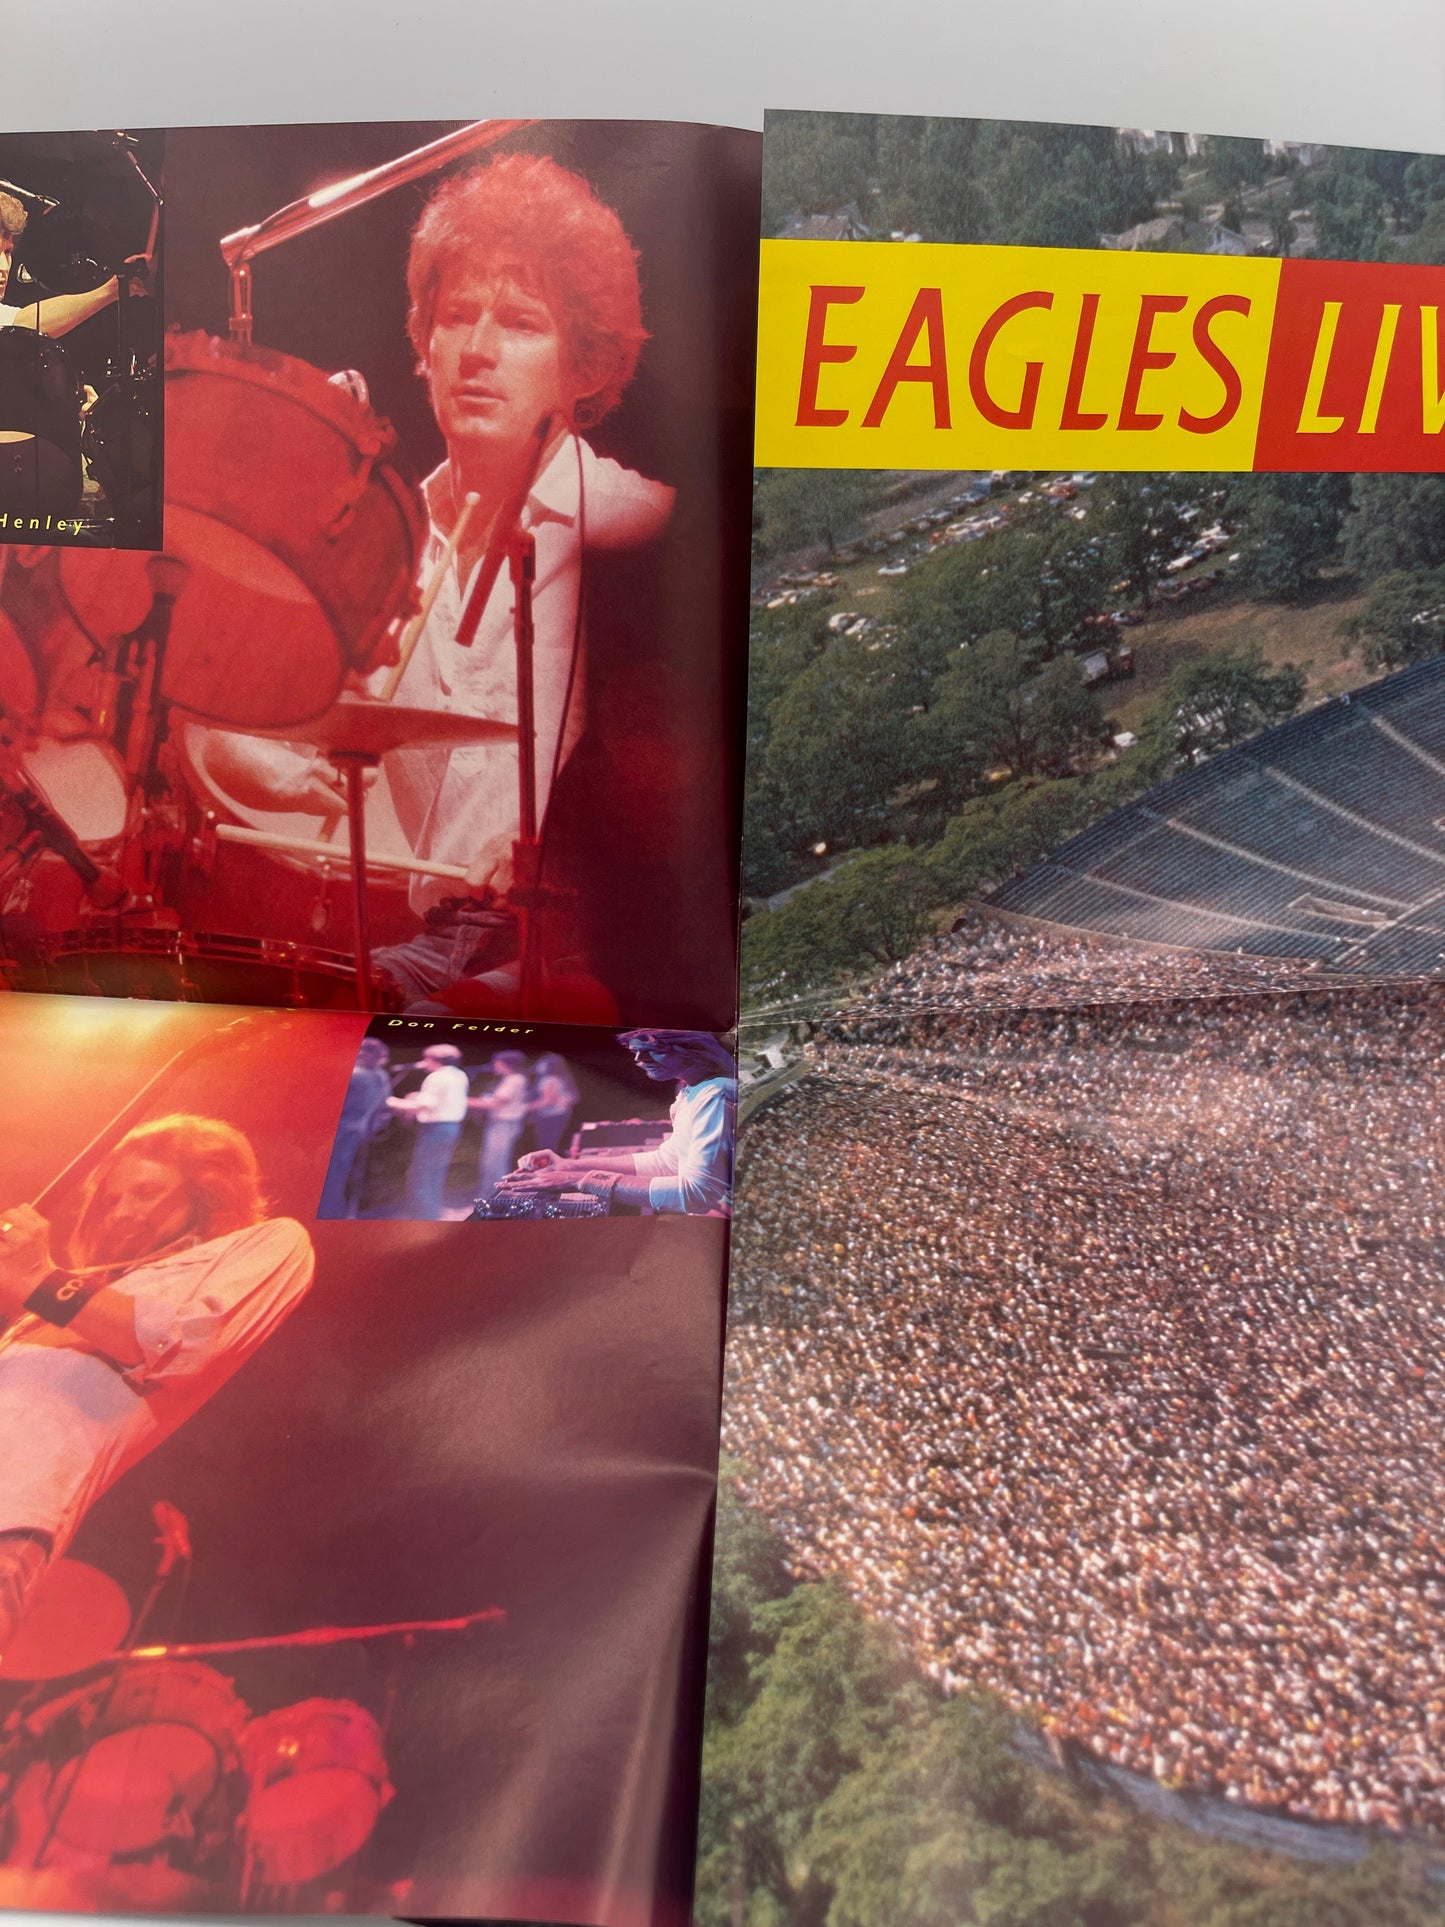 Eagles - Live (1980 Specialty)[COMPLETE!]